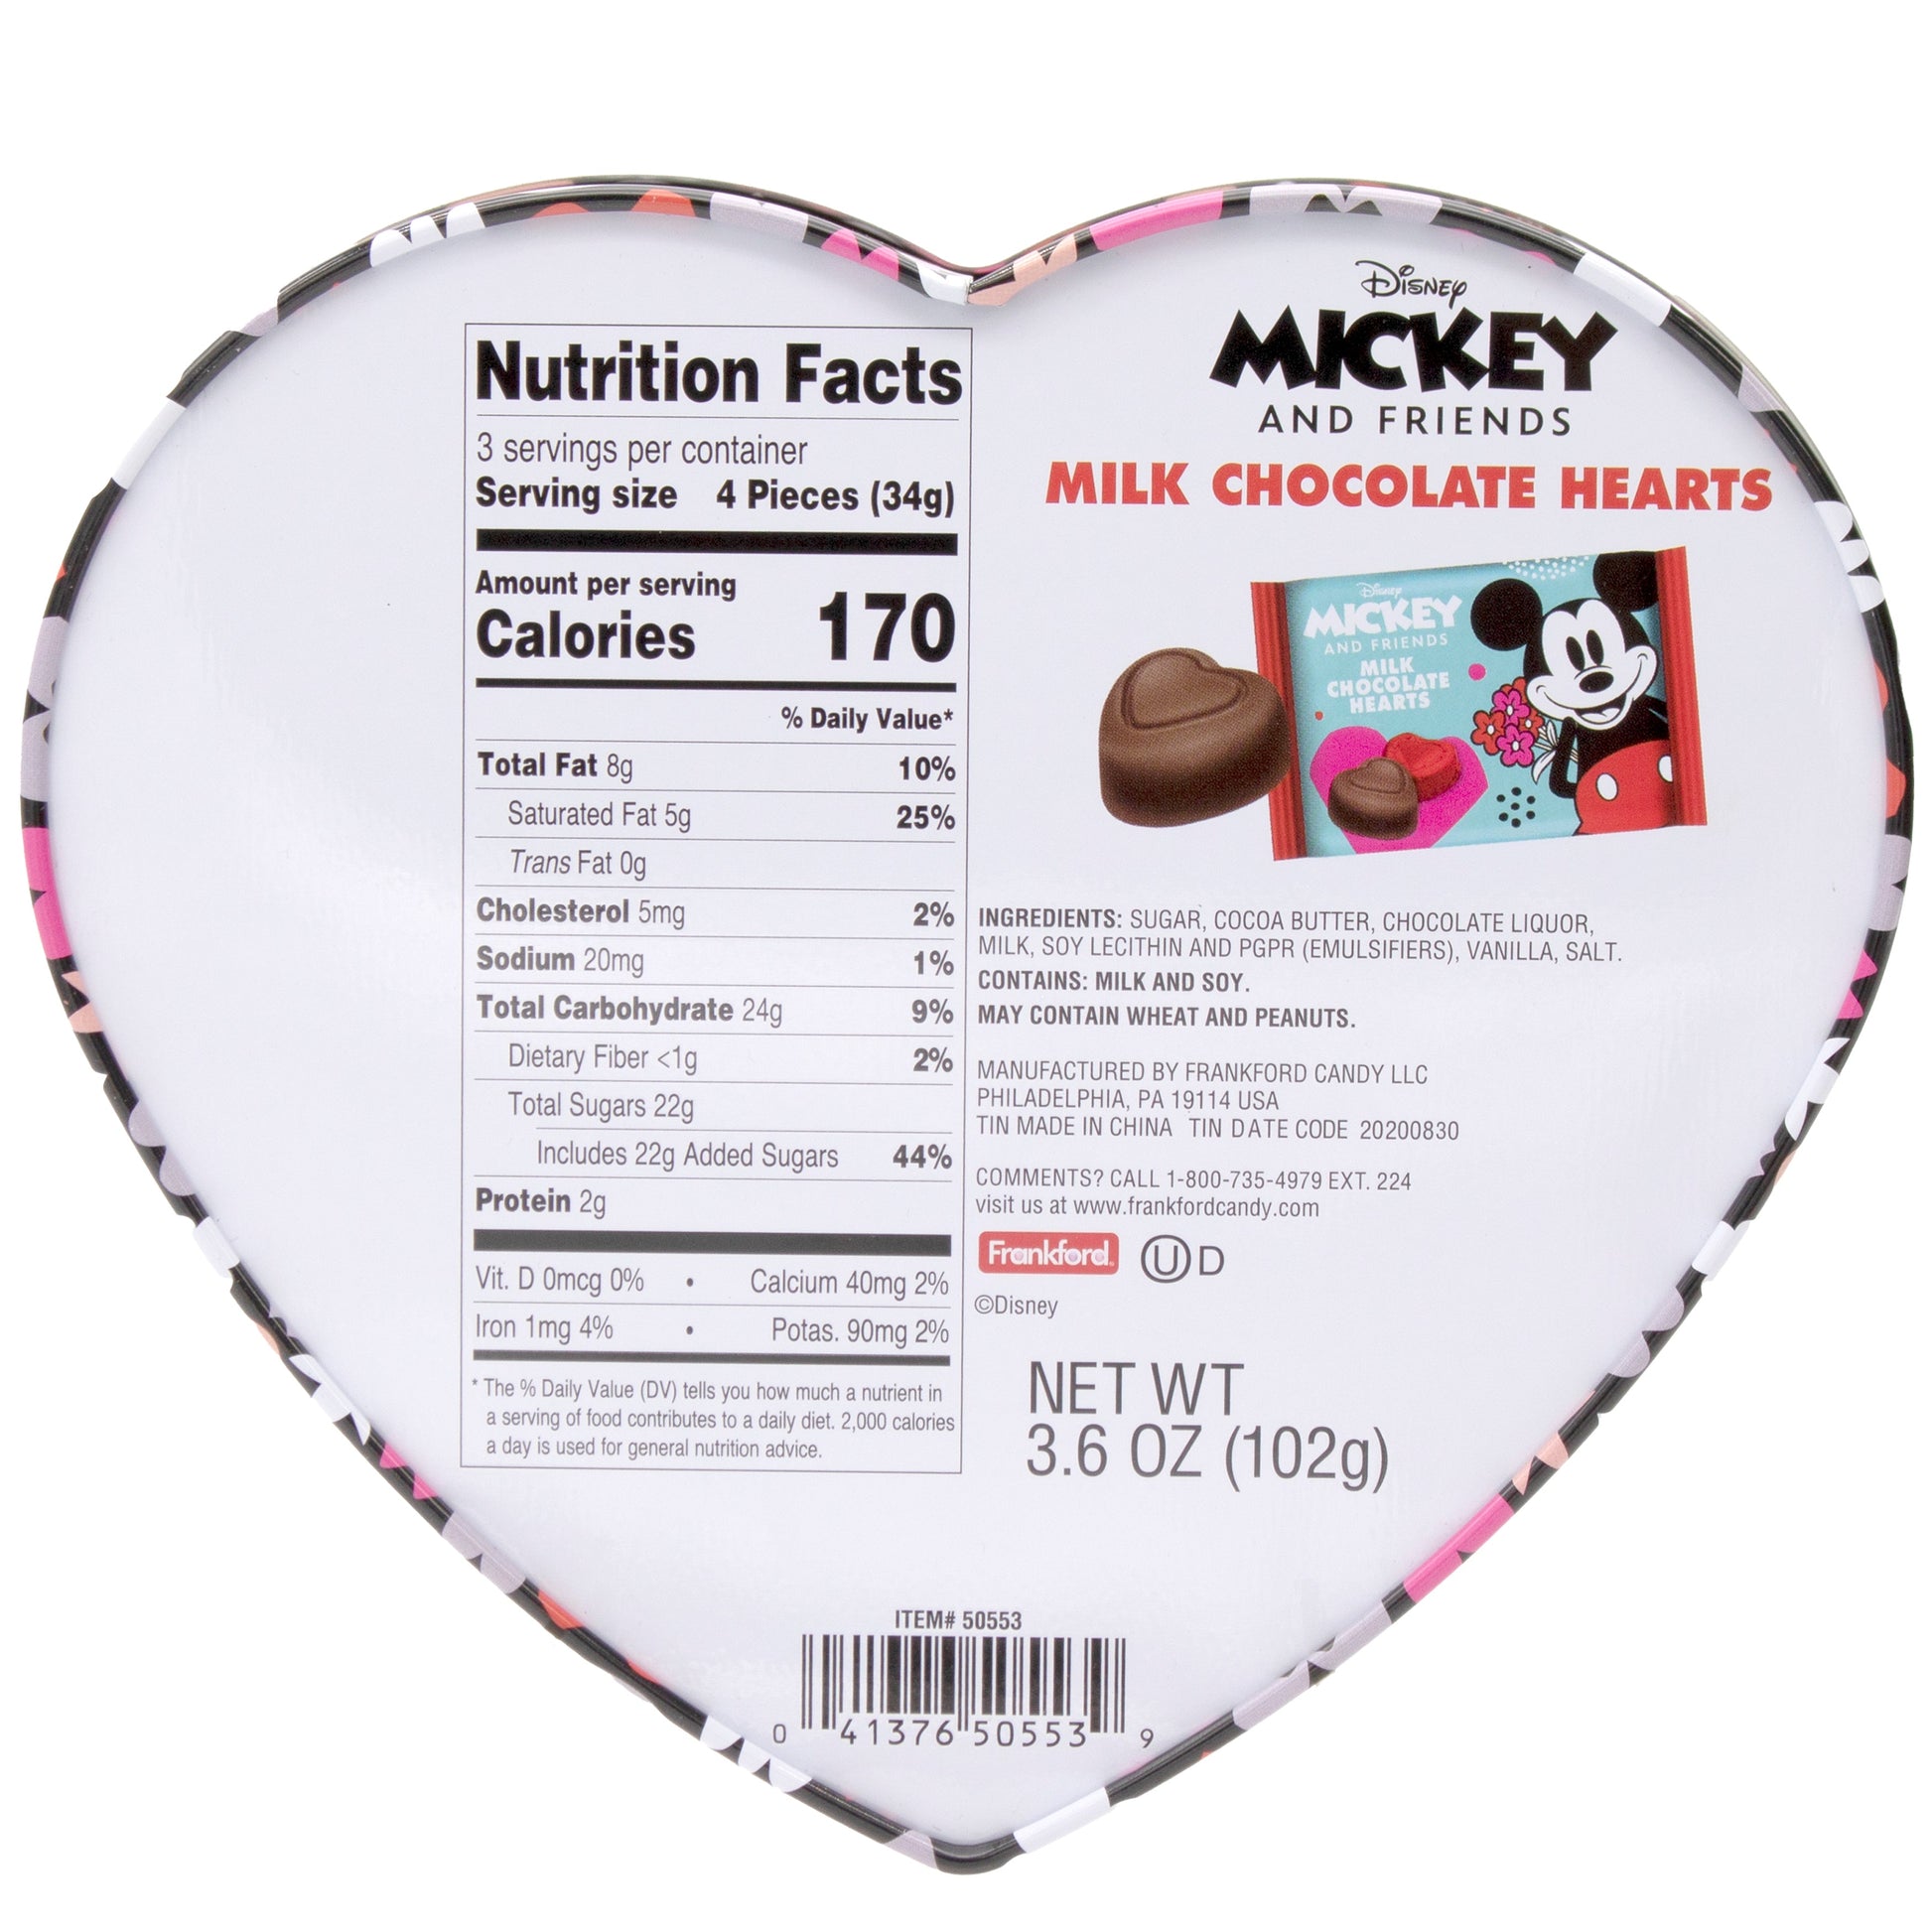 Back of heart shaped box with nutrition facts and ingredients